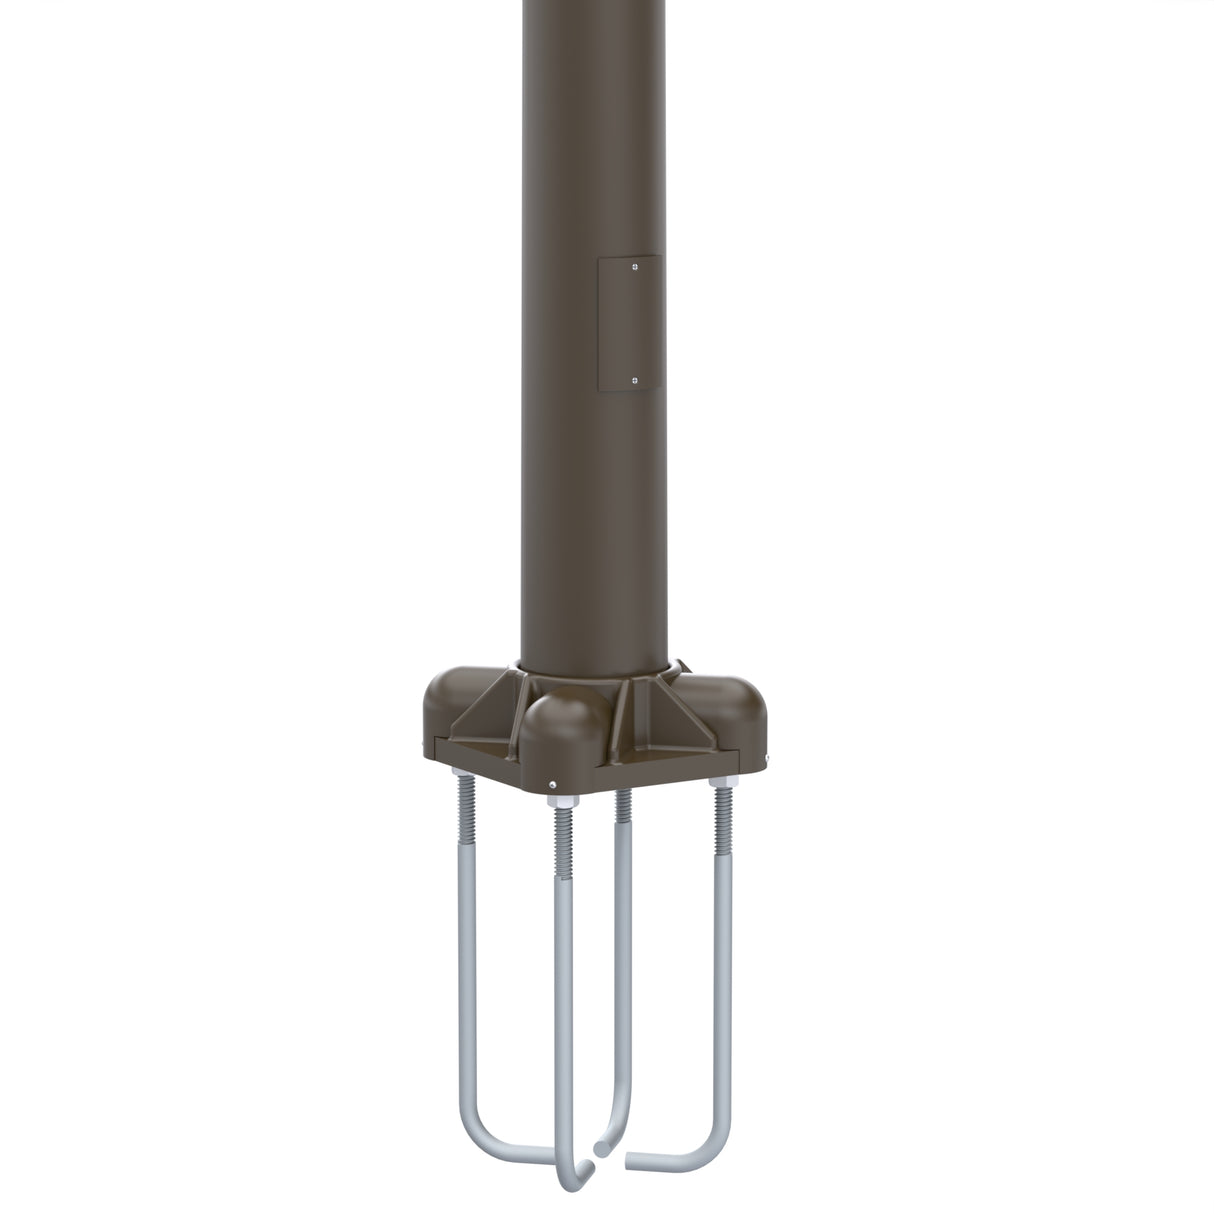 23' Tall x 8.0" Base OD x 4.5" Top OD x 0.188" Thick, Round Tapered Aluminum, Anchor Base Light Pole